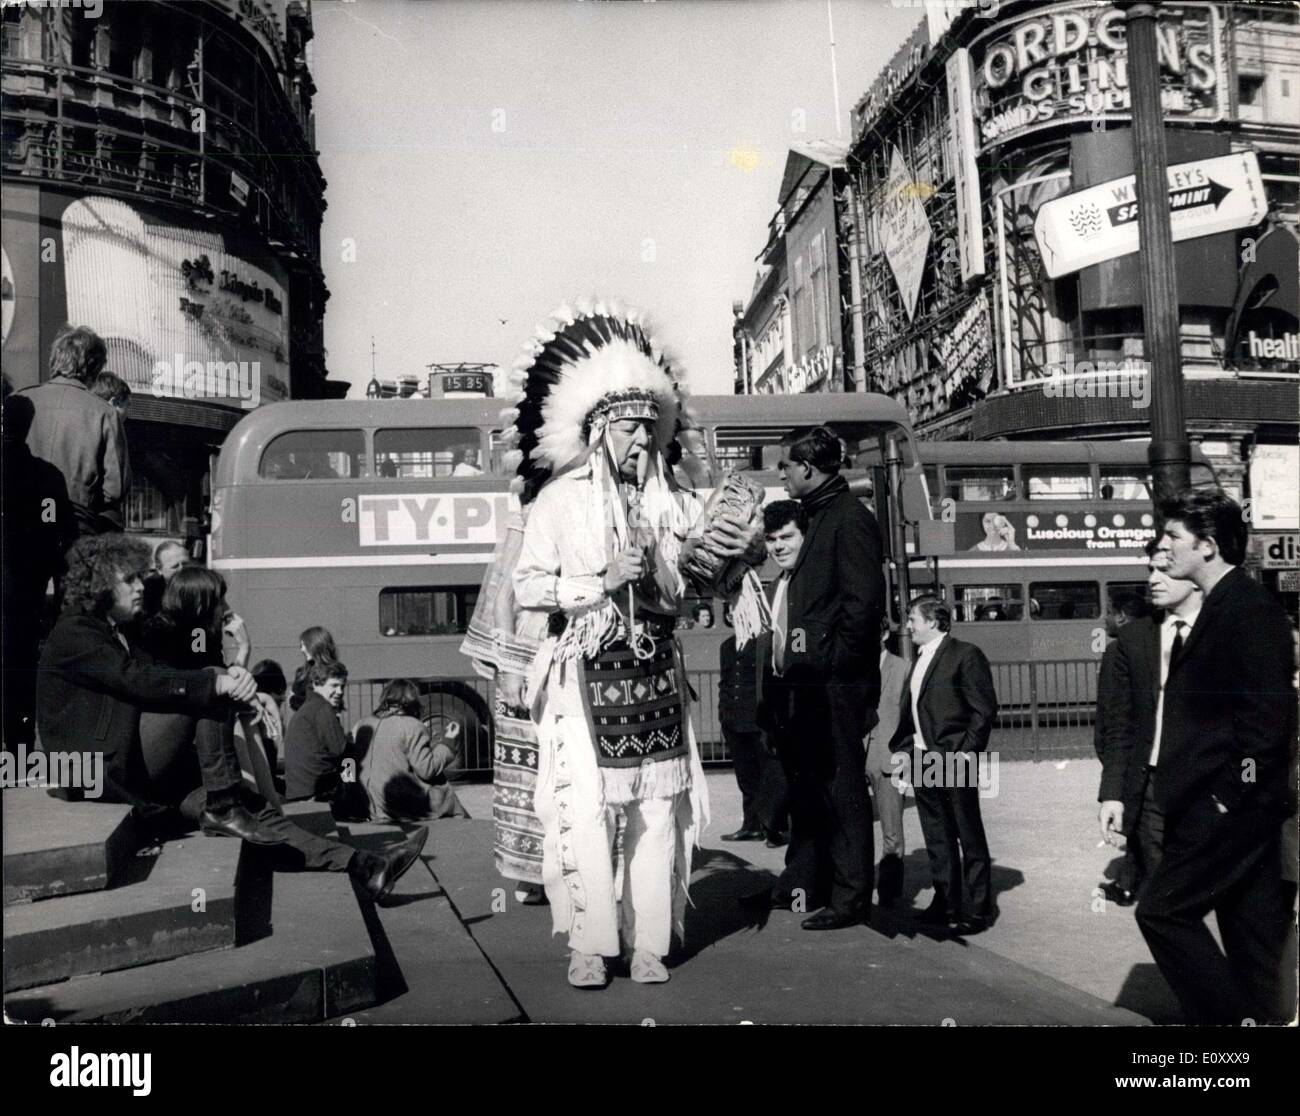 Mar. 26, 1968 - Party of Indians in London on Goodwill visit. Three members of the party of six Indians who are here for three weeks on a goodwill visit sponsored by the U.S. department of Commerce, were out in London today in their national costume. The three are Chief Wolf Robe Hunt, full chief of the Acoma pueblo Indian Tribe. (From Tulea, Oklahoma), Chief Joe Dan Osceola, leader of the Seminoles, Great - great grandson of Chief Osceola, famous war chief of the Seminoles when they fought the United states Stock Photo